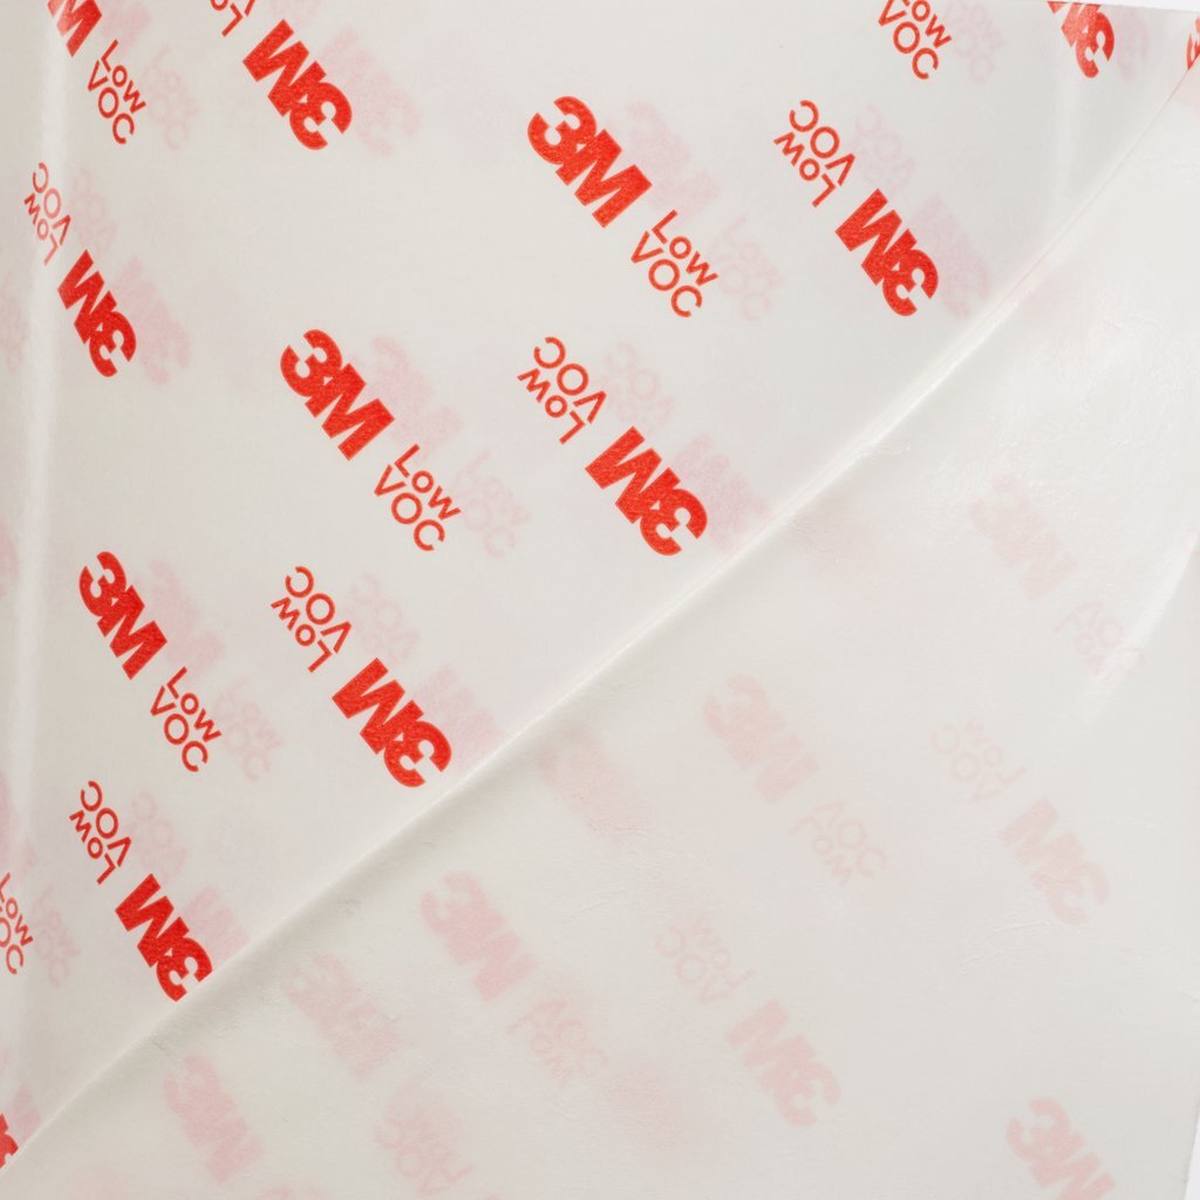 3M Double-sided adhesive tape with non-woven paper backing 99015LVC, white, 50 mm x 50 m, 0.15 mm